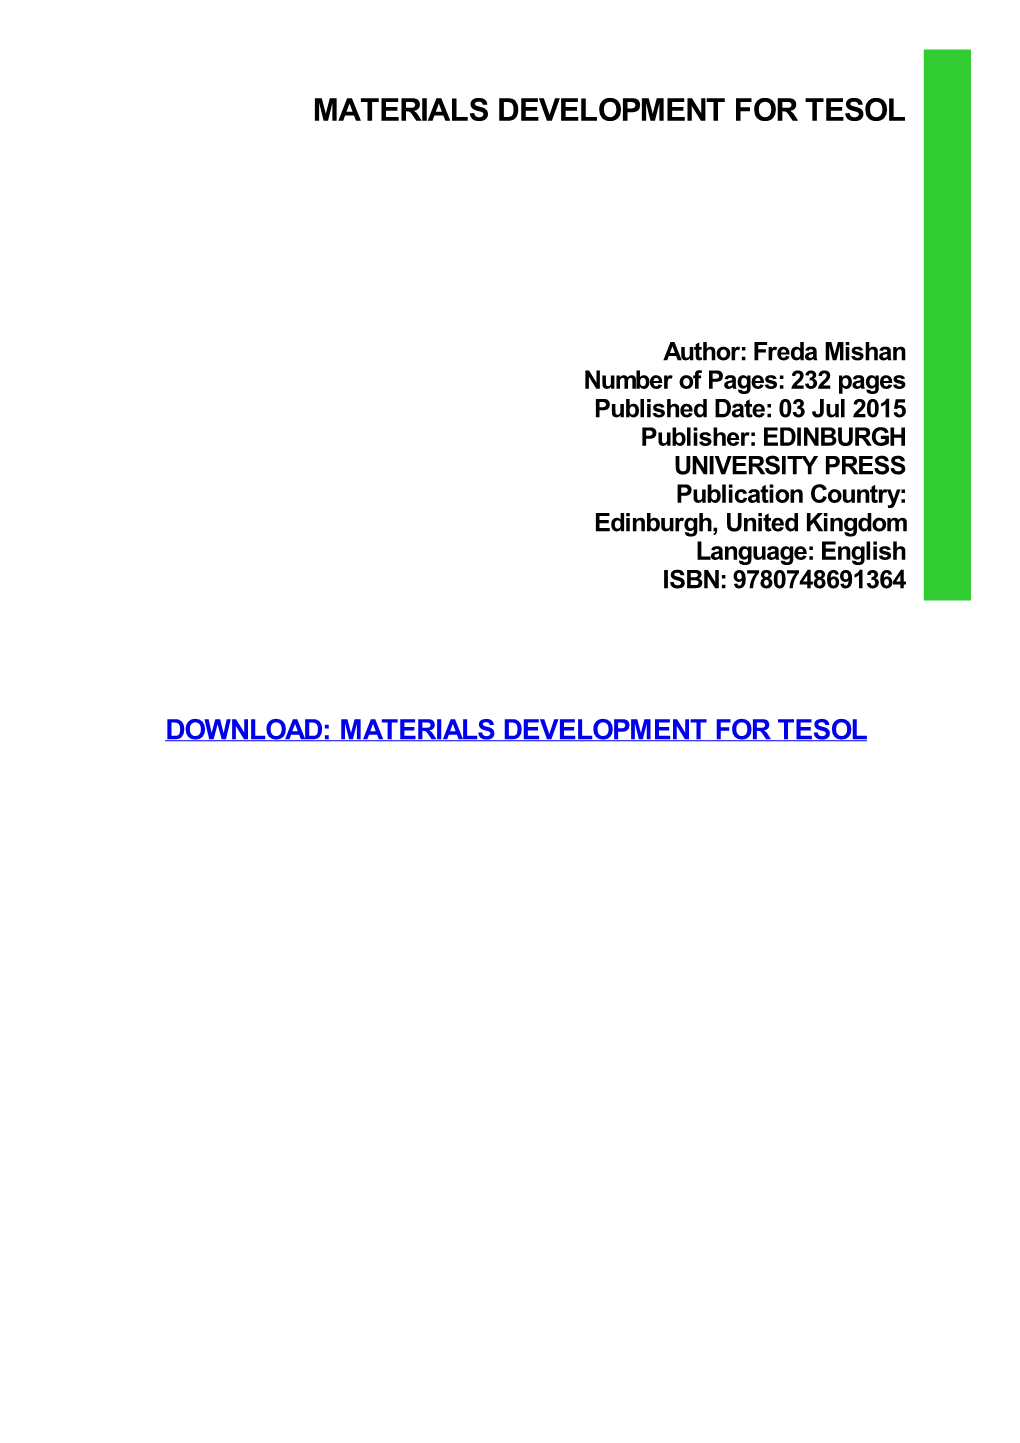 Materials Development for TESOL Download Free